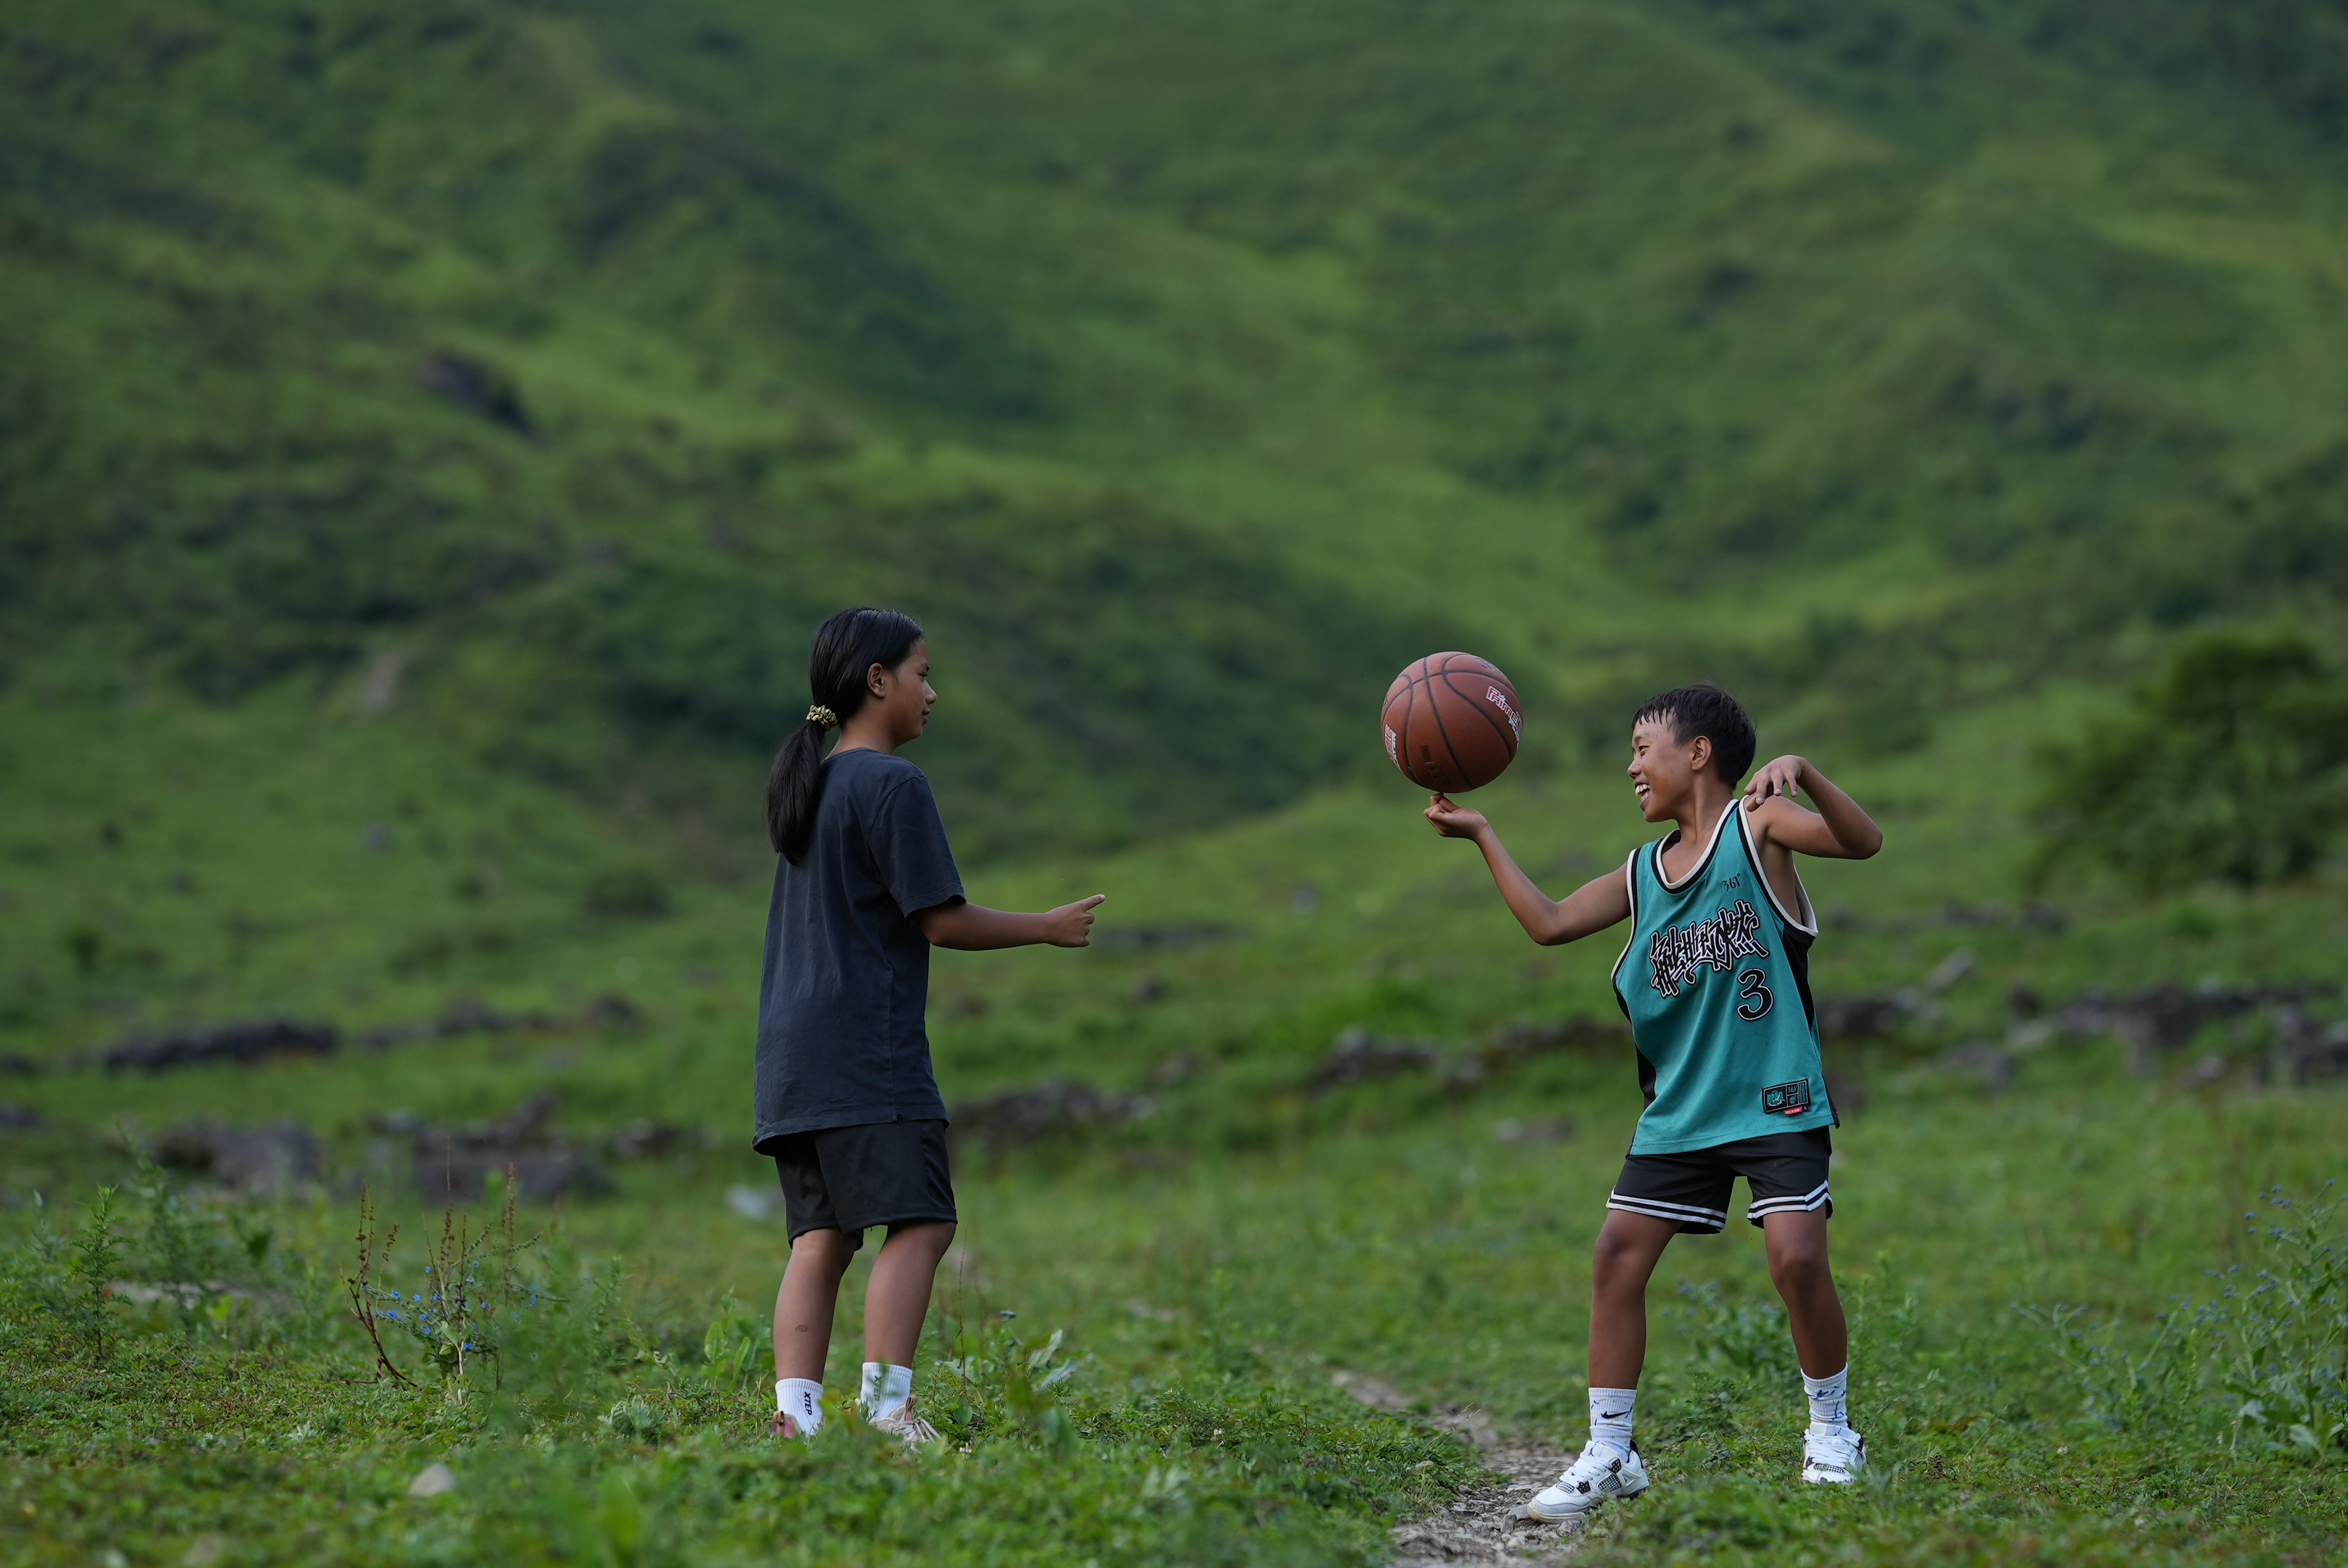 This undated photo shows kids pairing basketball finger spinning skills in Liangshan Yi Autonomous Prefecture, southwest China's Sichuan Province. /CGTN